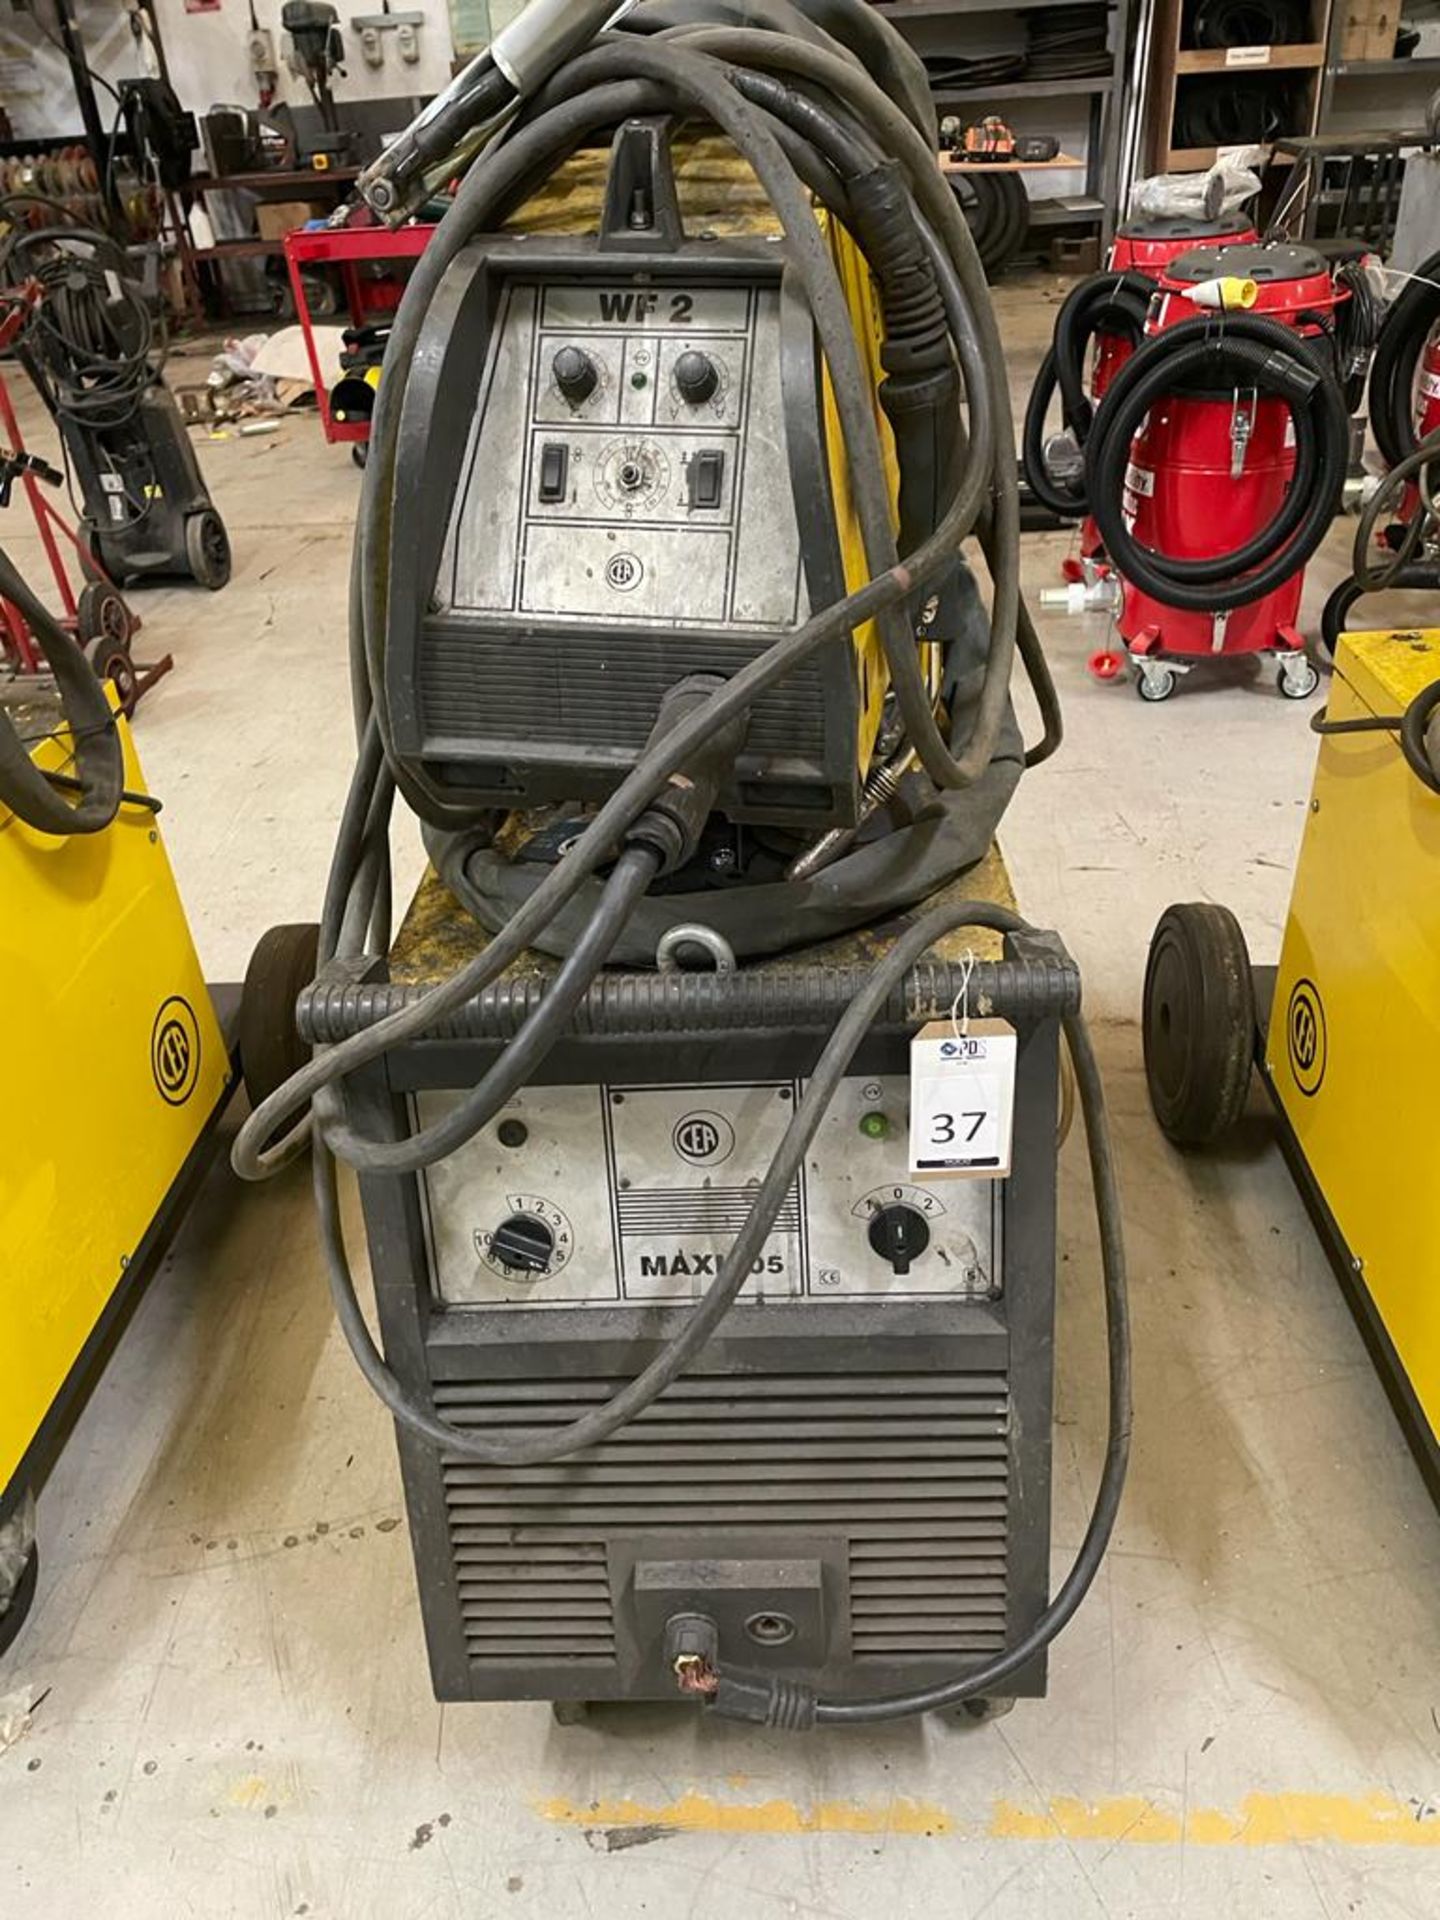 CEA Maxi 405 Mig Welder, Serial Number 055x210025 with WF5 Wire Feed Unit (Location Brentwood.